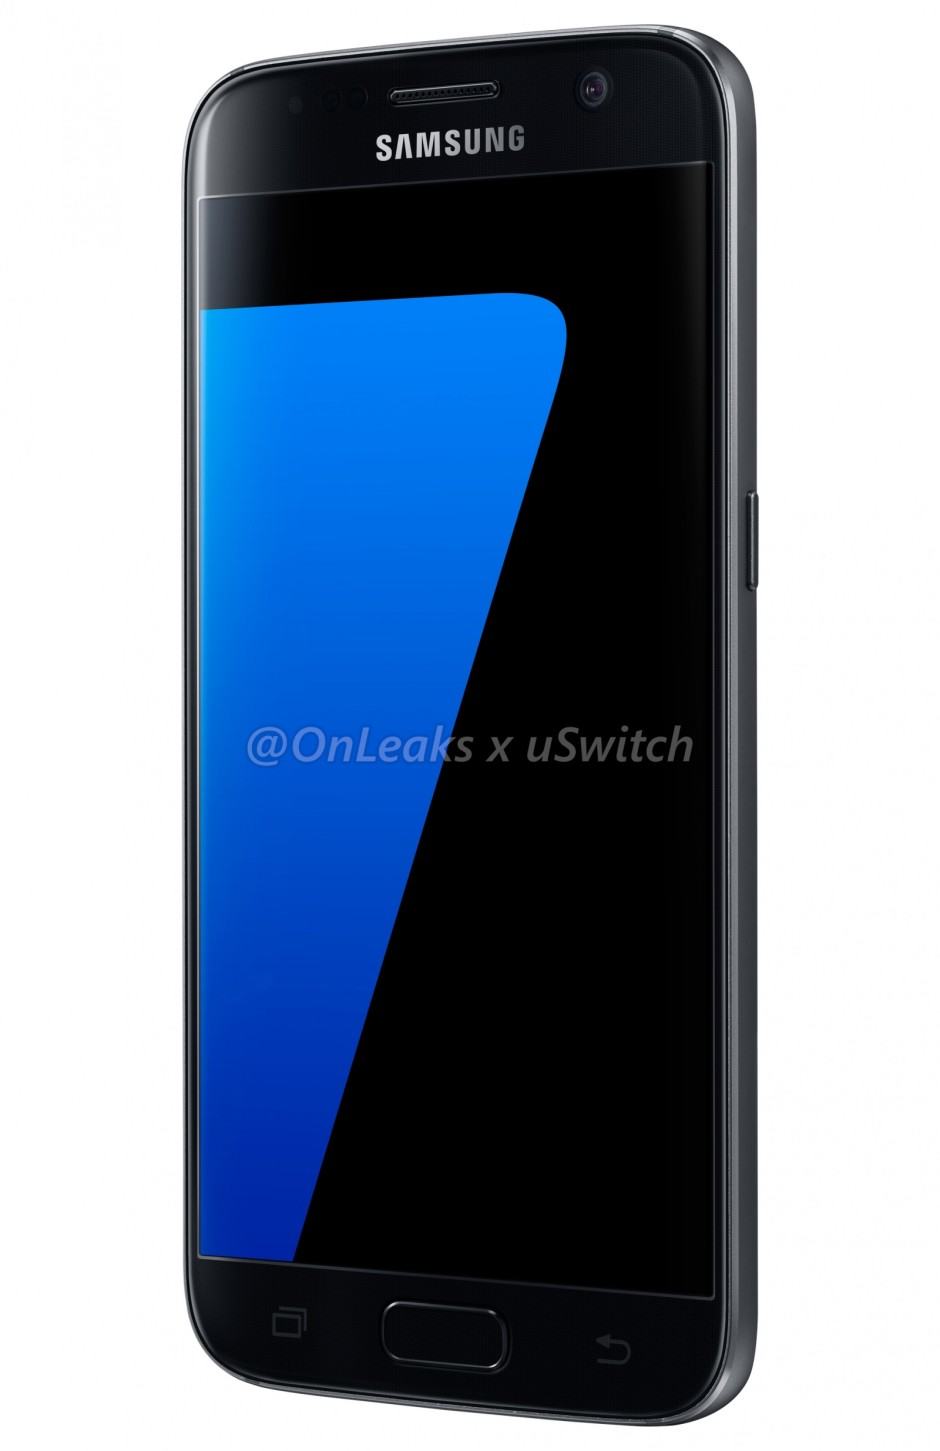 Samsung's Galaxy S7 Edge looks just as good in black. Photo: @onleaks/uswitch